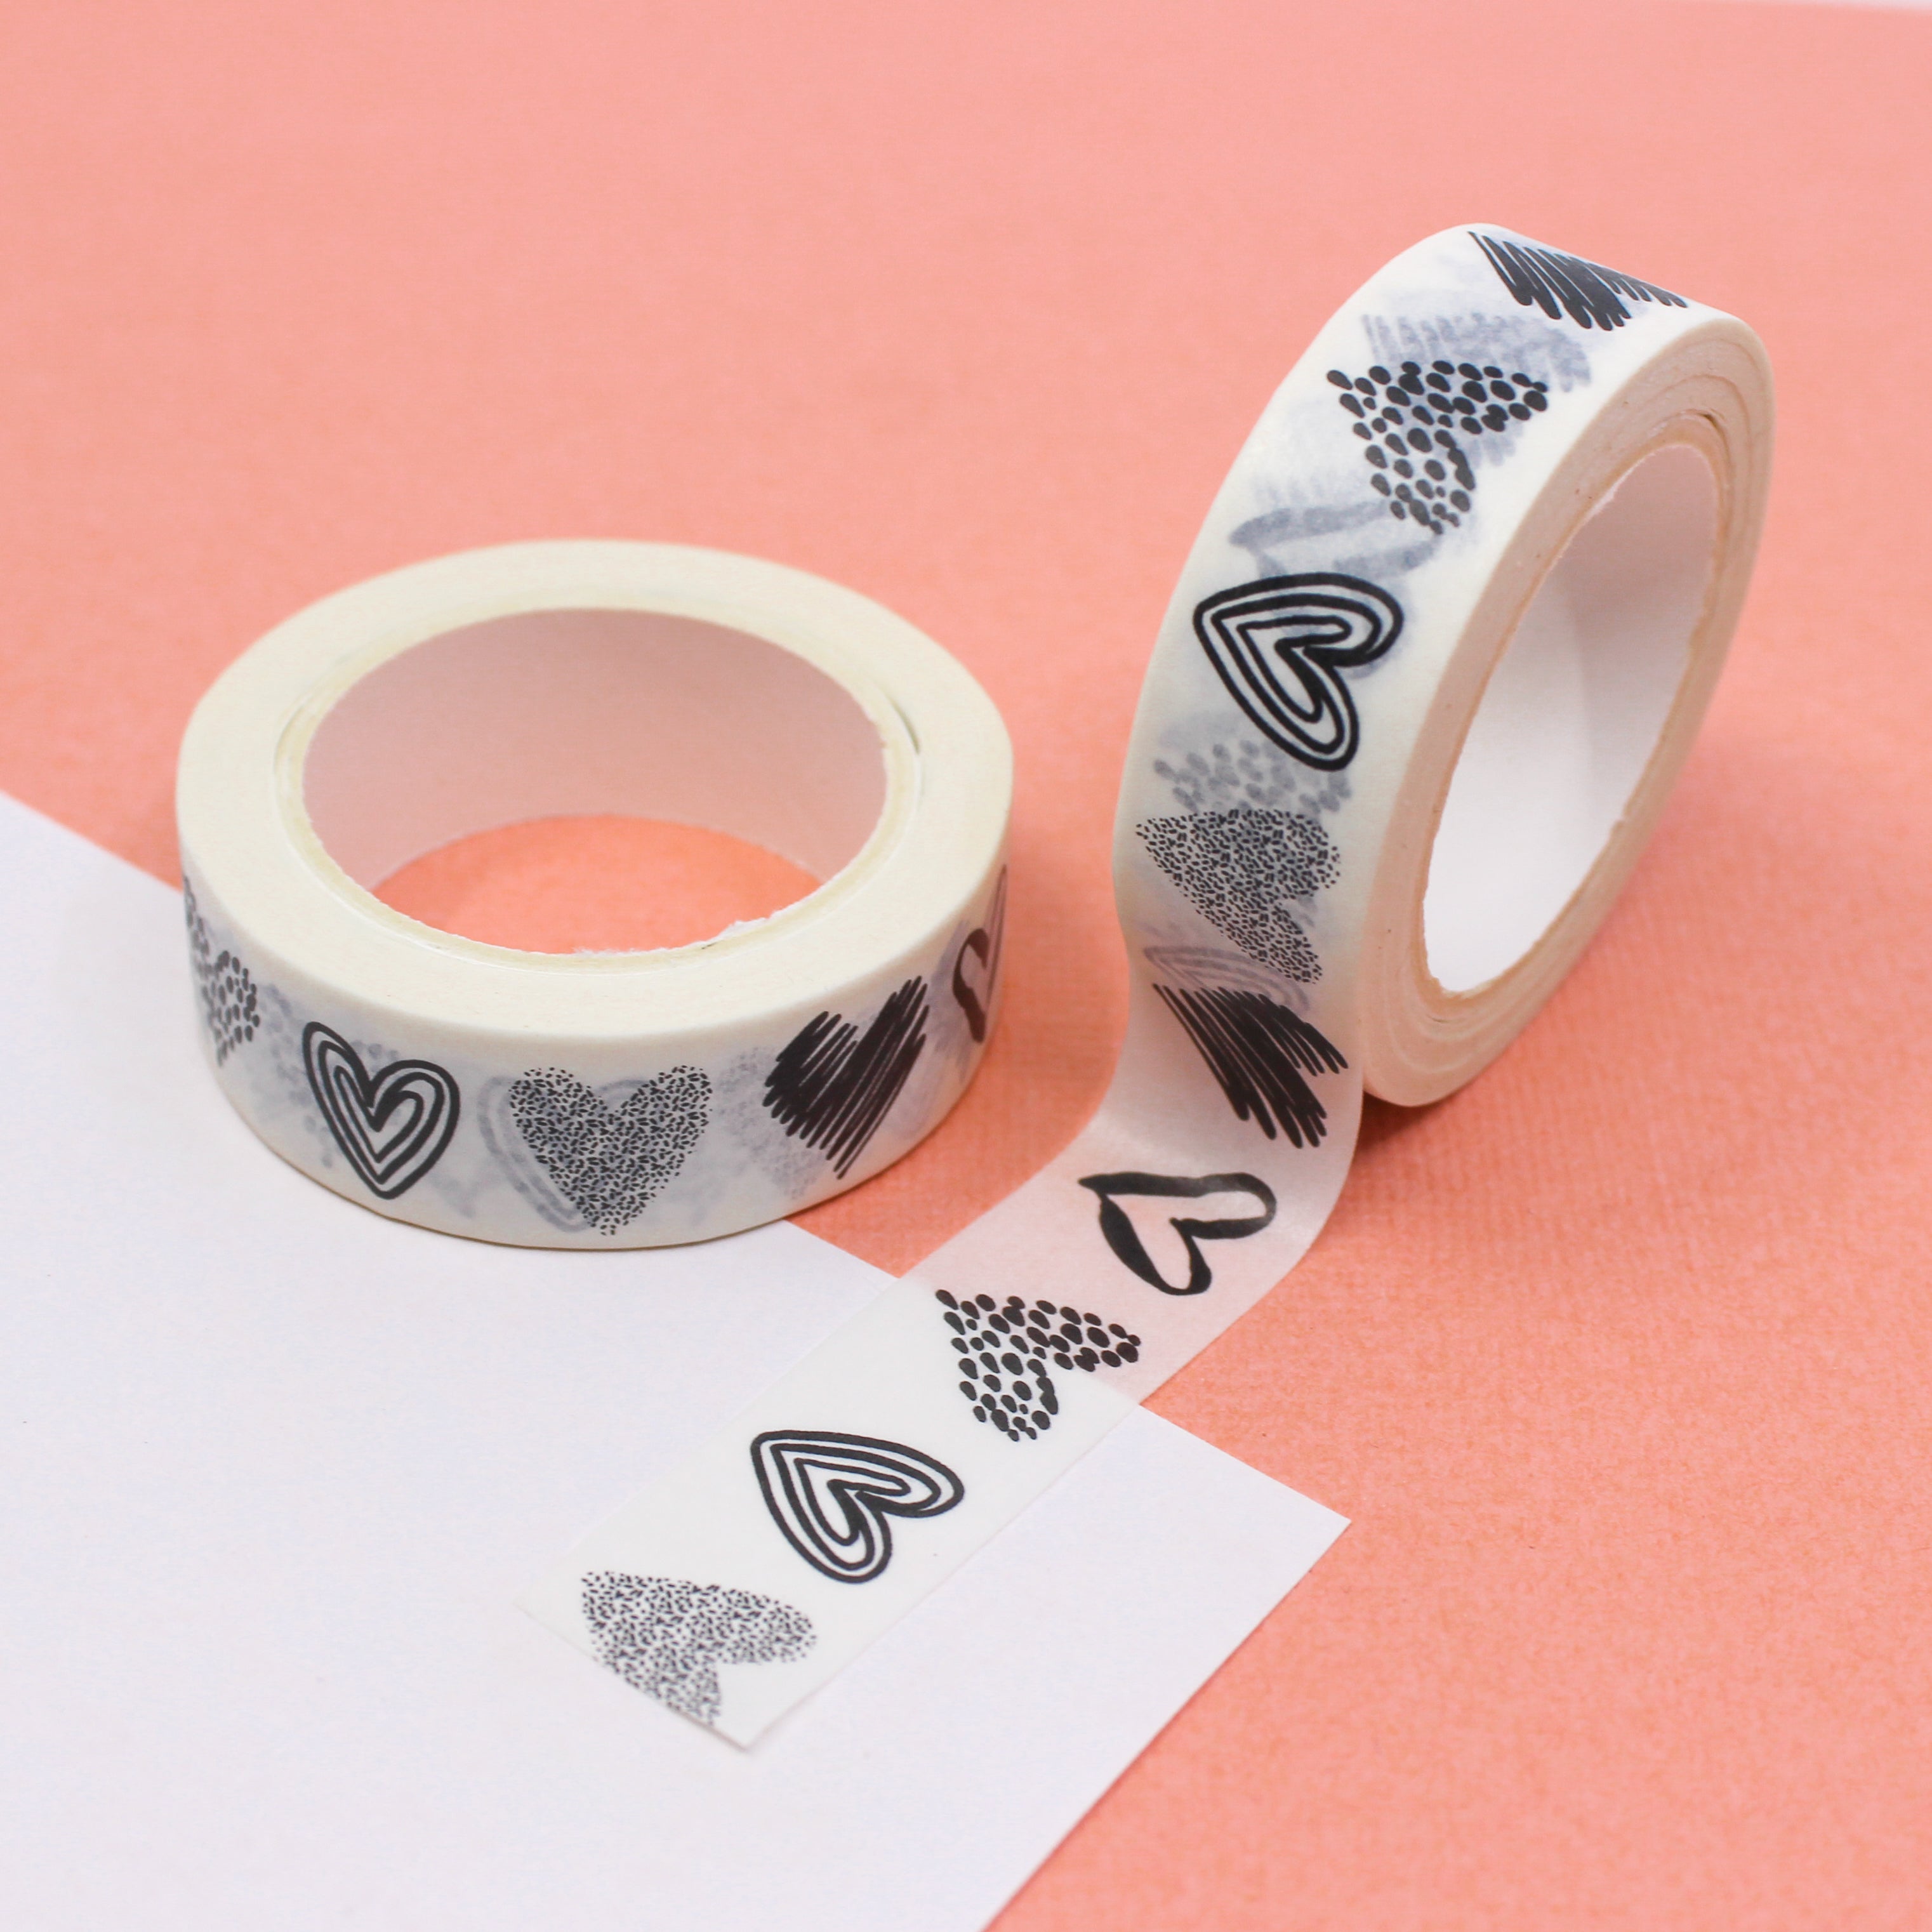 This is a black sketchy hearts view themed washi tape from BBB Supplies Craft Shop